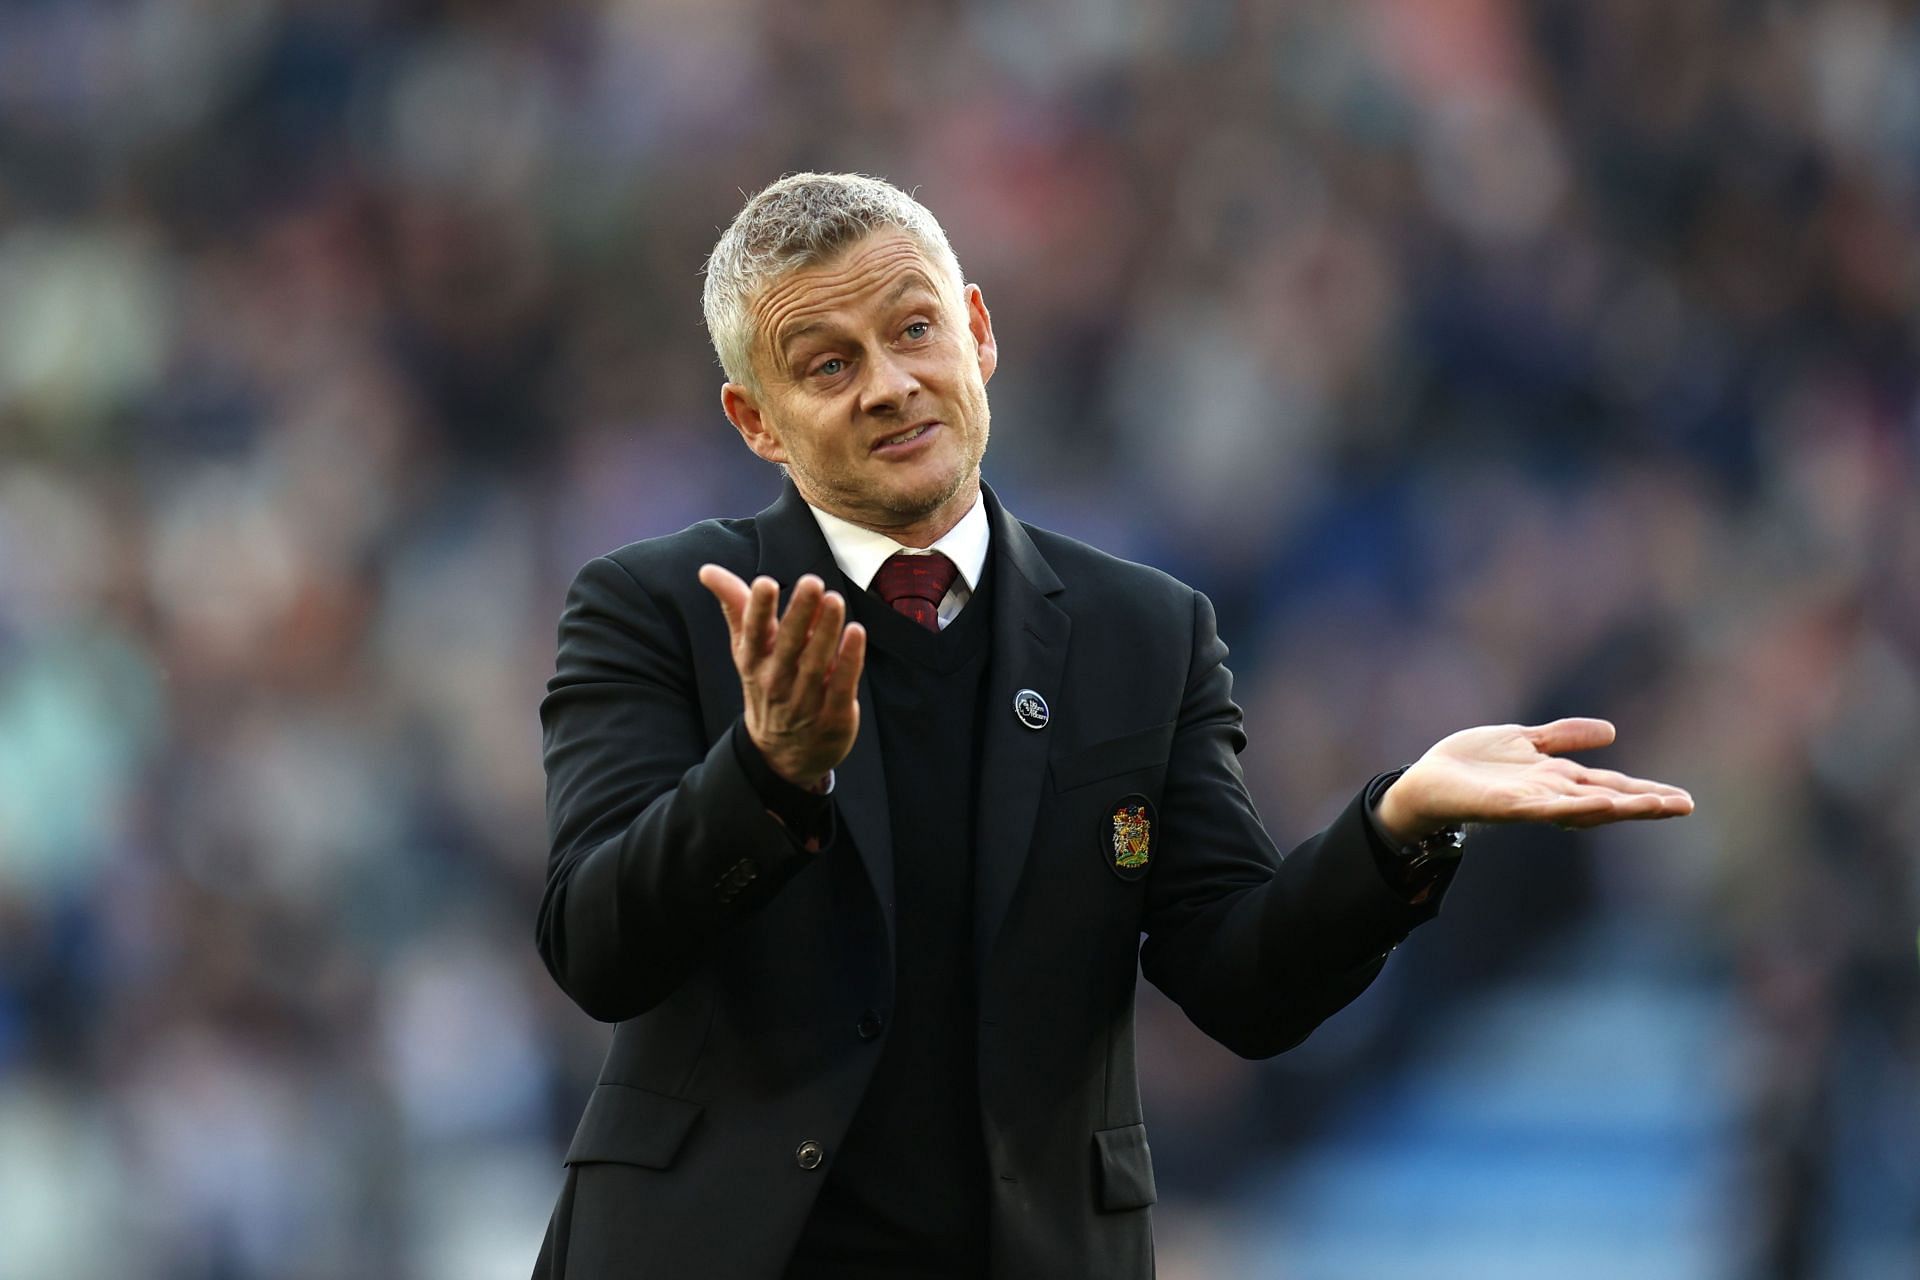 Former Manchester United manager Ole reportedly ignored advice from his coaching staff.